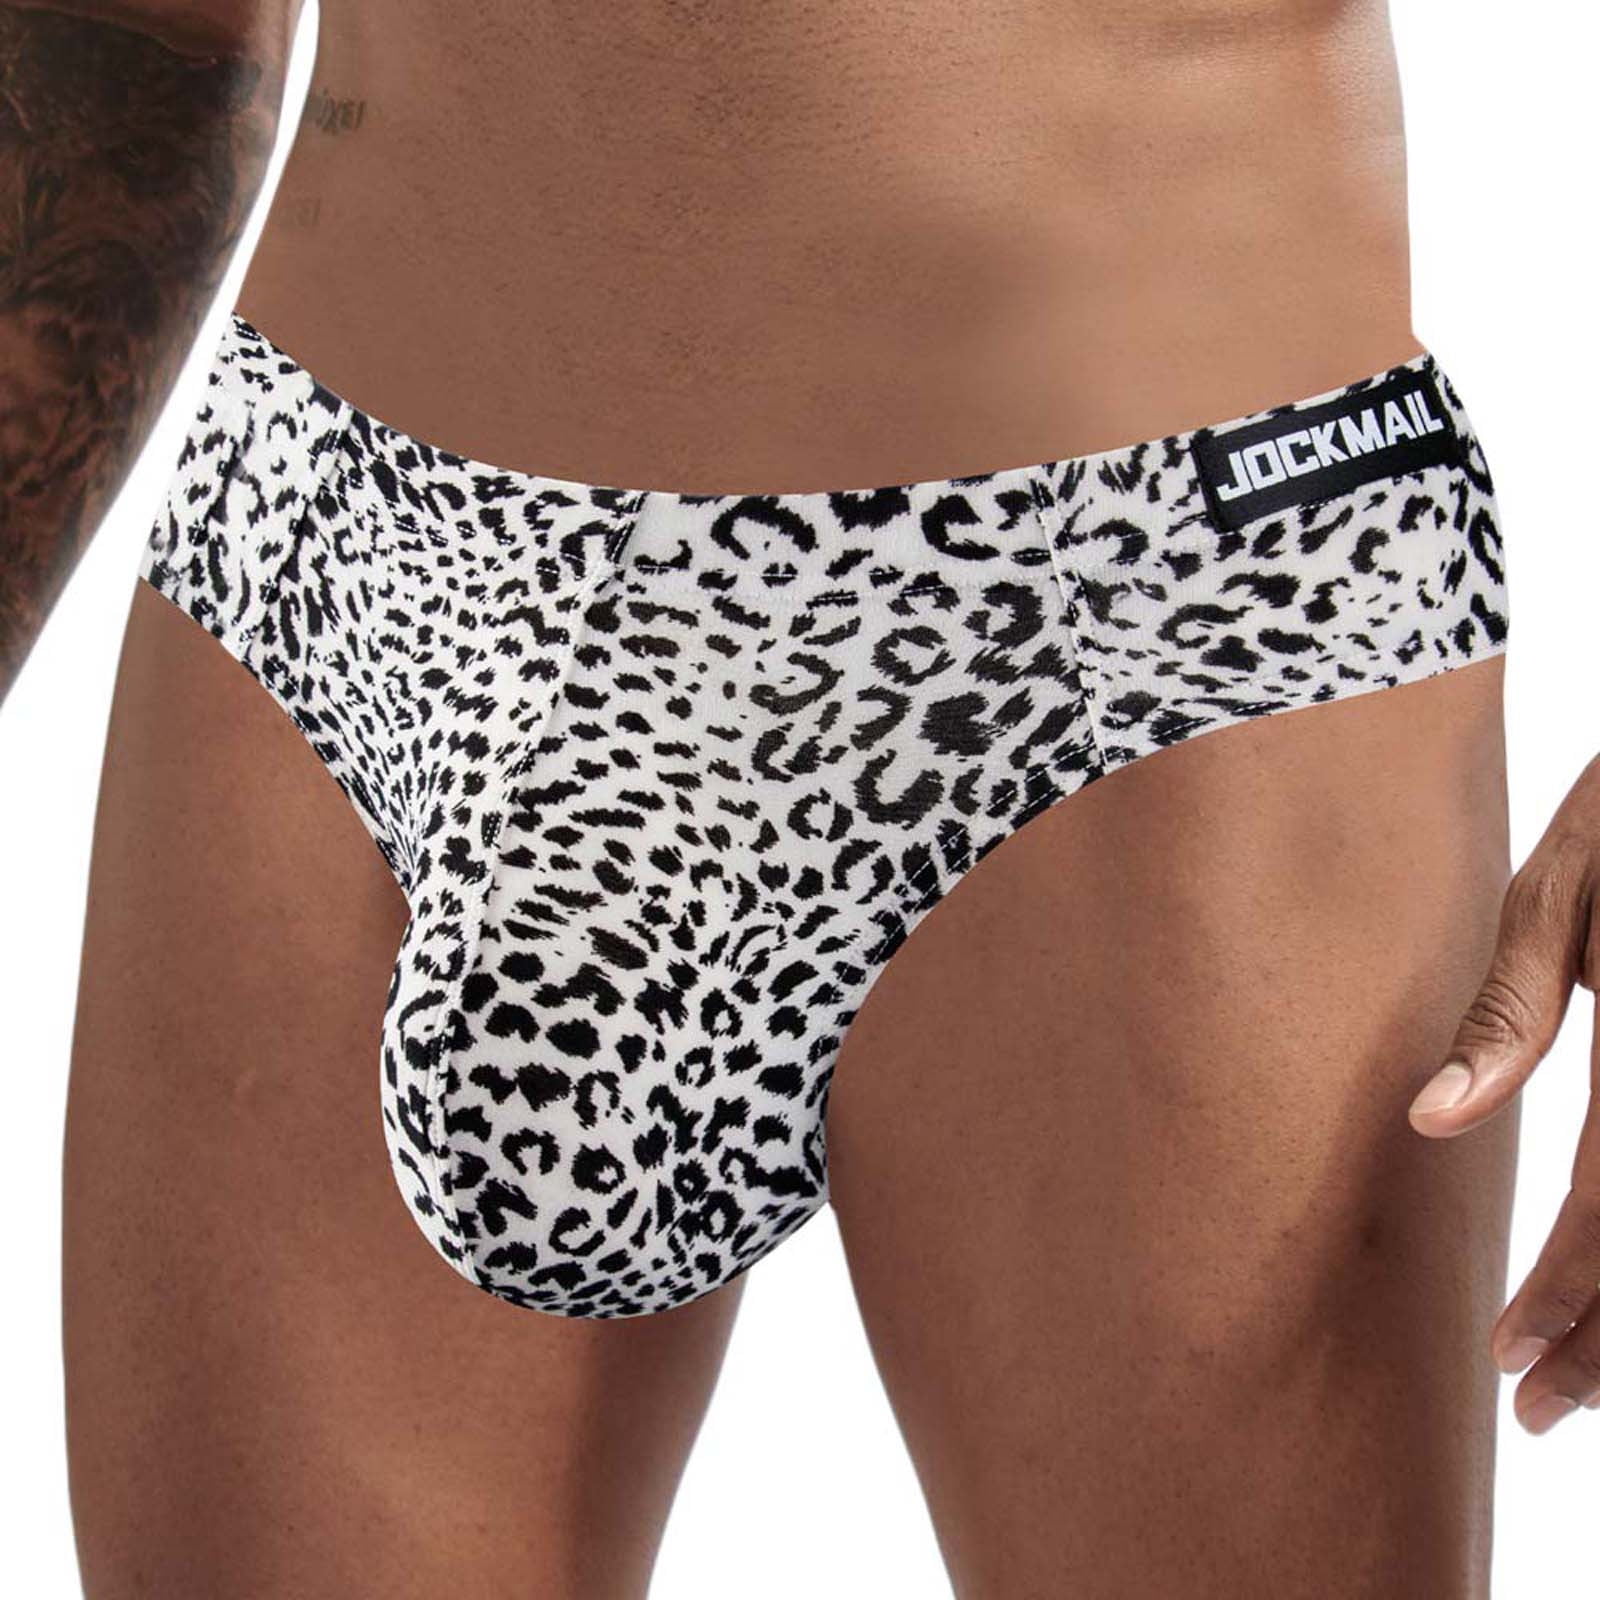 Deals of Today Mens Underwear Briefs Casual Brief Low-rise Leopard Prints  Silky Temptation Single Thong Bikini Boxer Brief Low-rise Pants